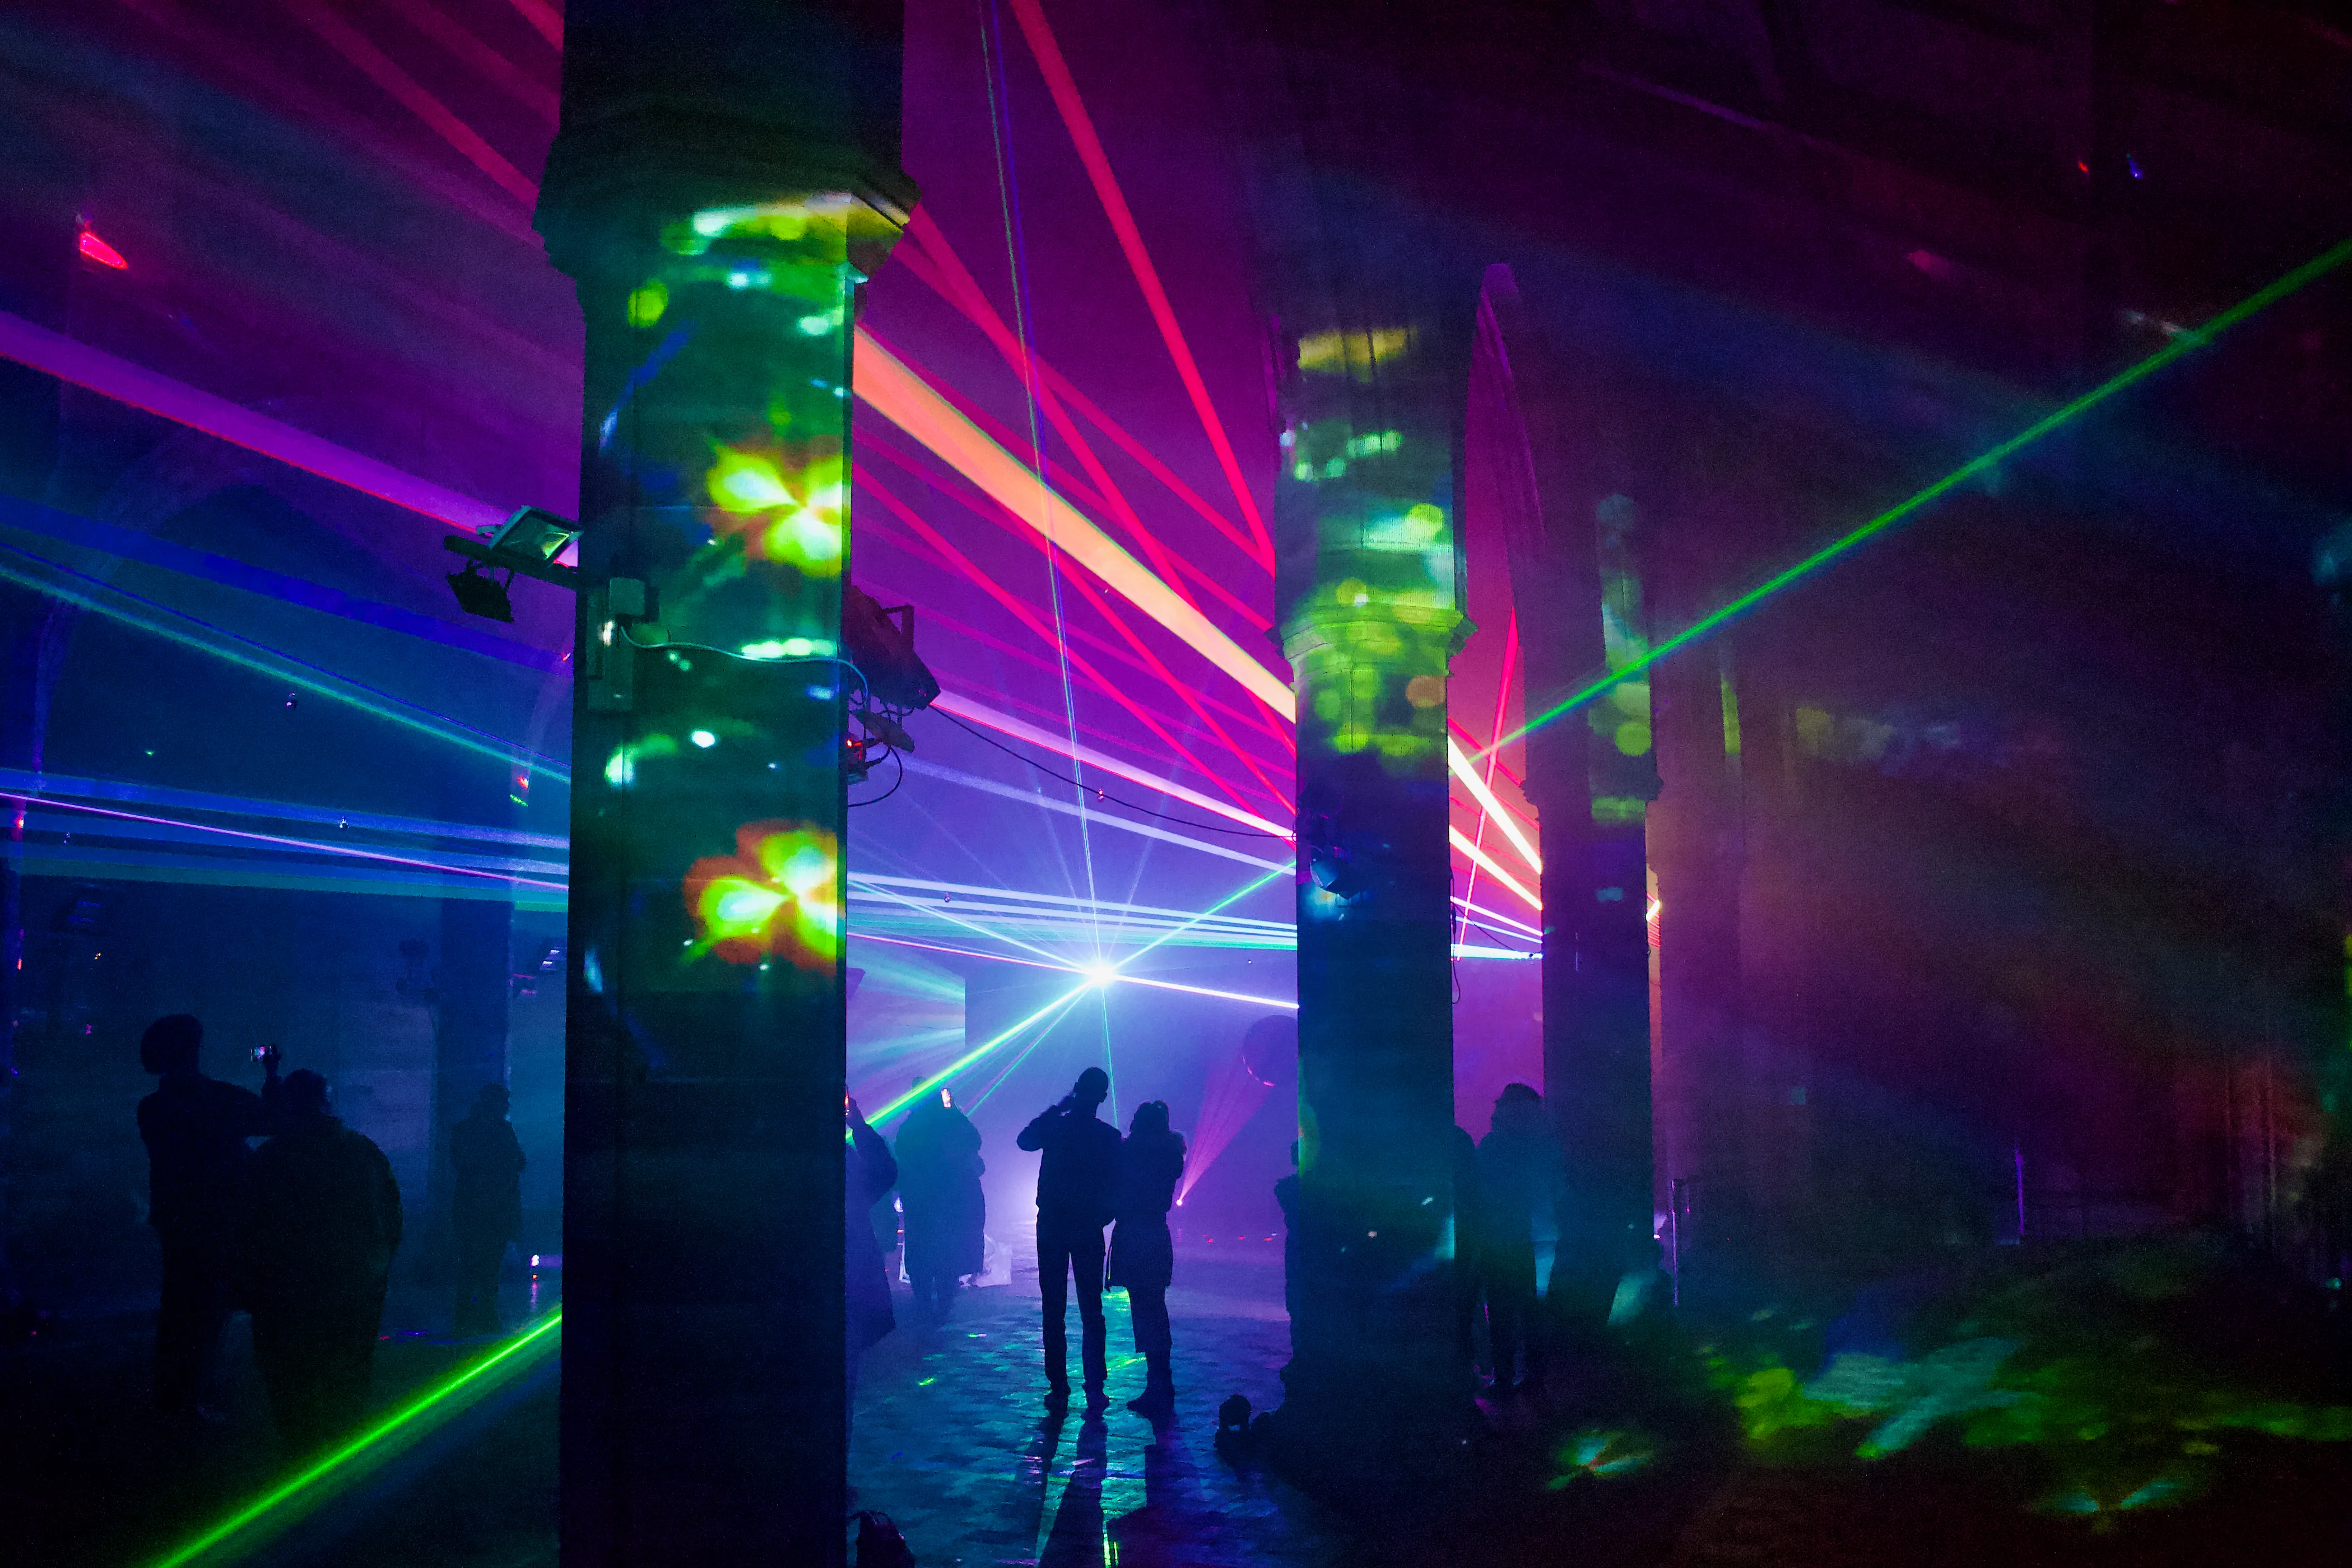 Lasers shooting between columns from Paul Alty's "Black Hole - End of Time" installation